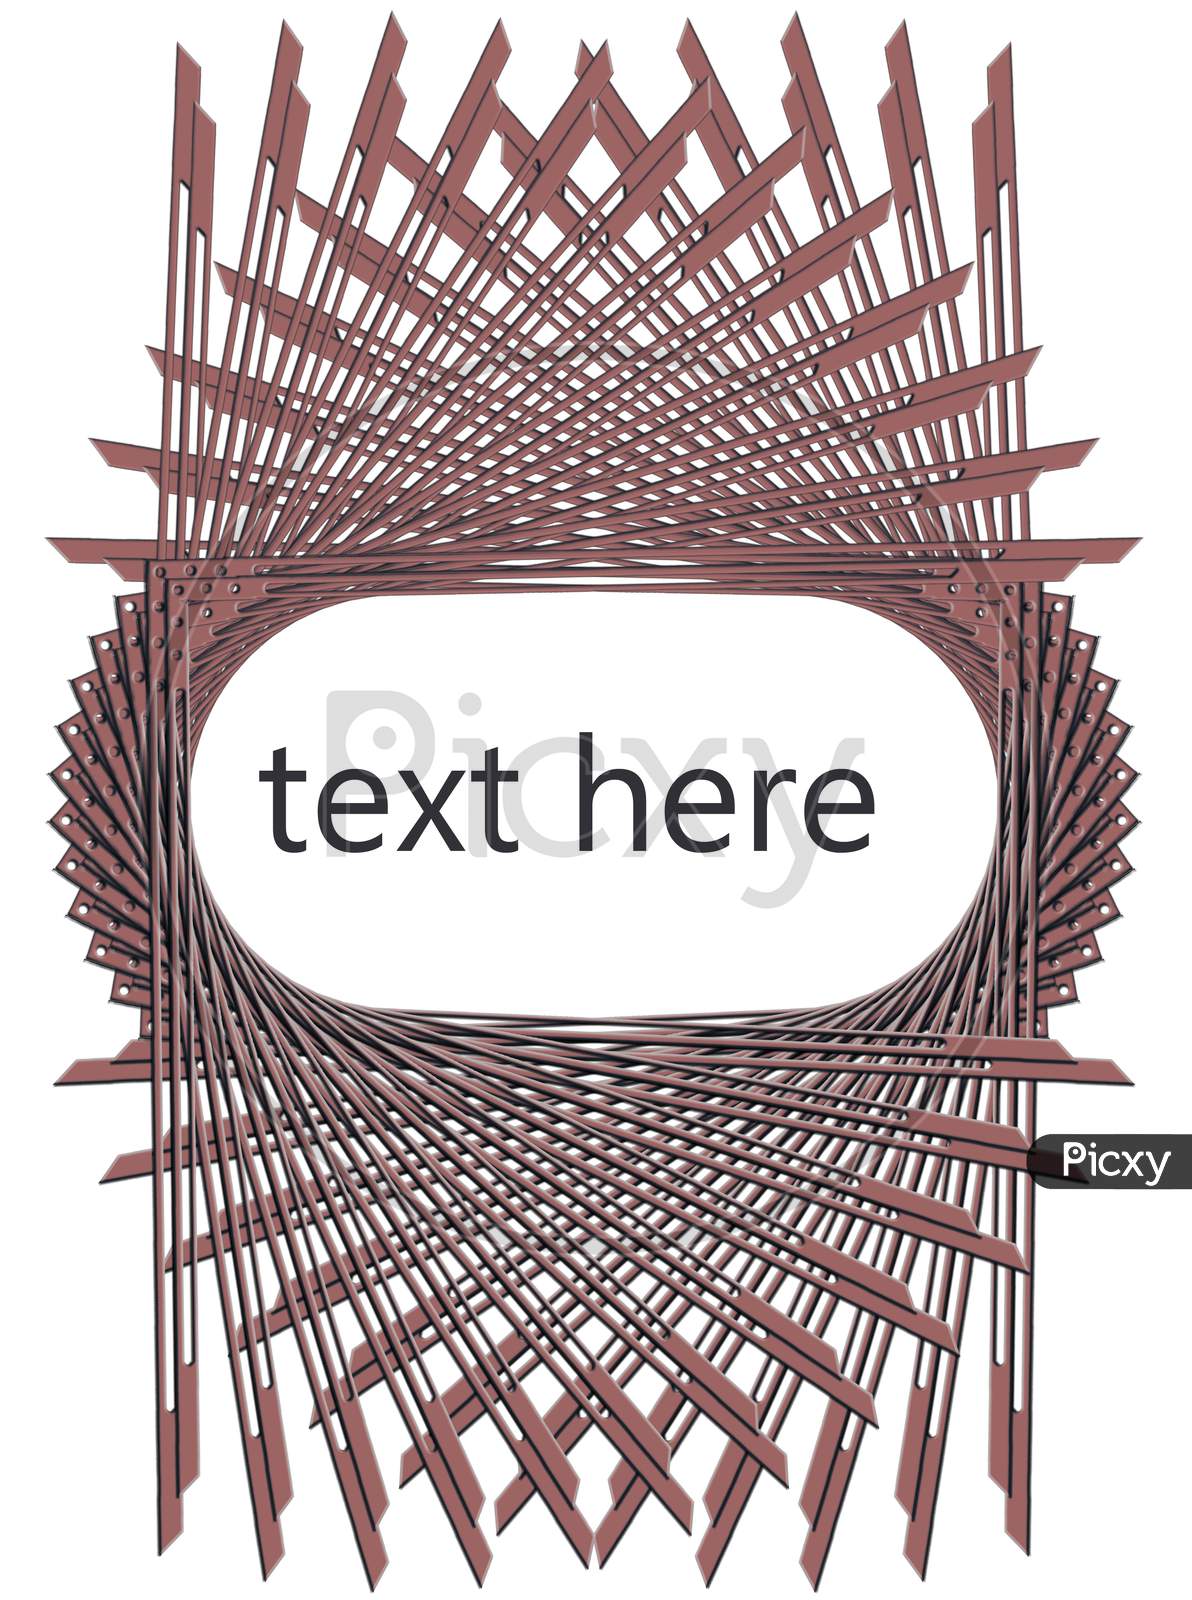 Text Space And Border Design Oval Shaped